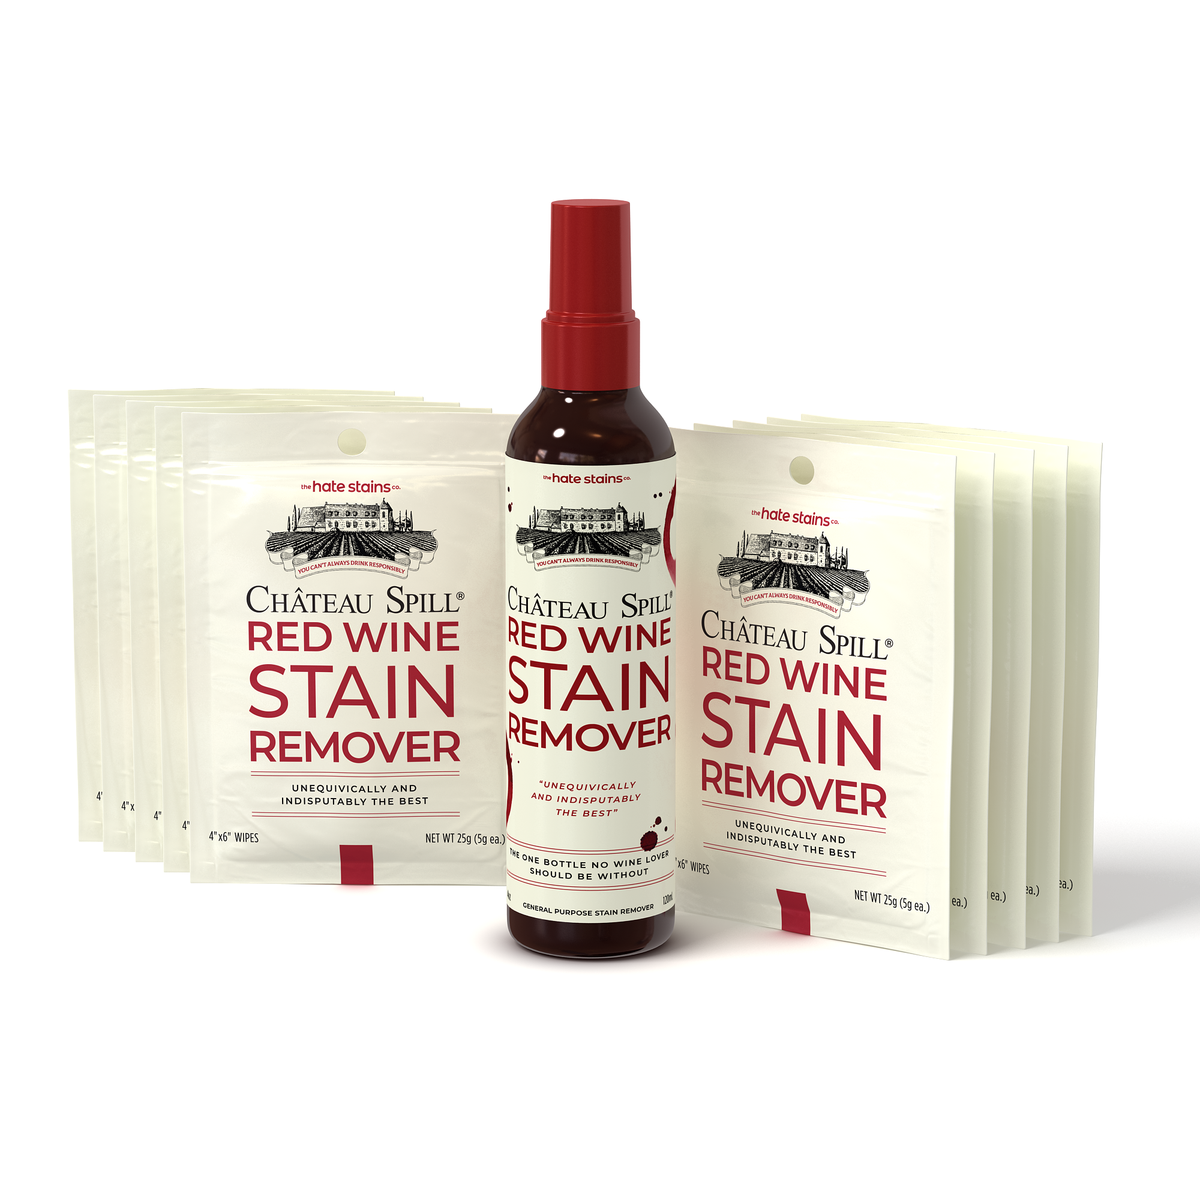 Chateau Spill Red Wine Stain Remover (1 Bottle + 10 Wipes Kit)